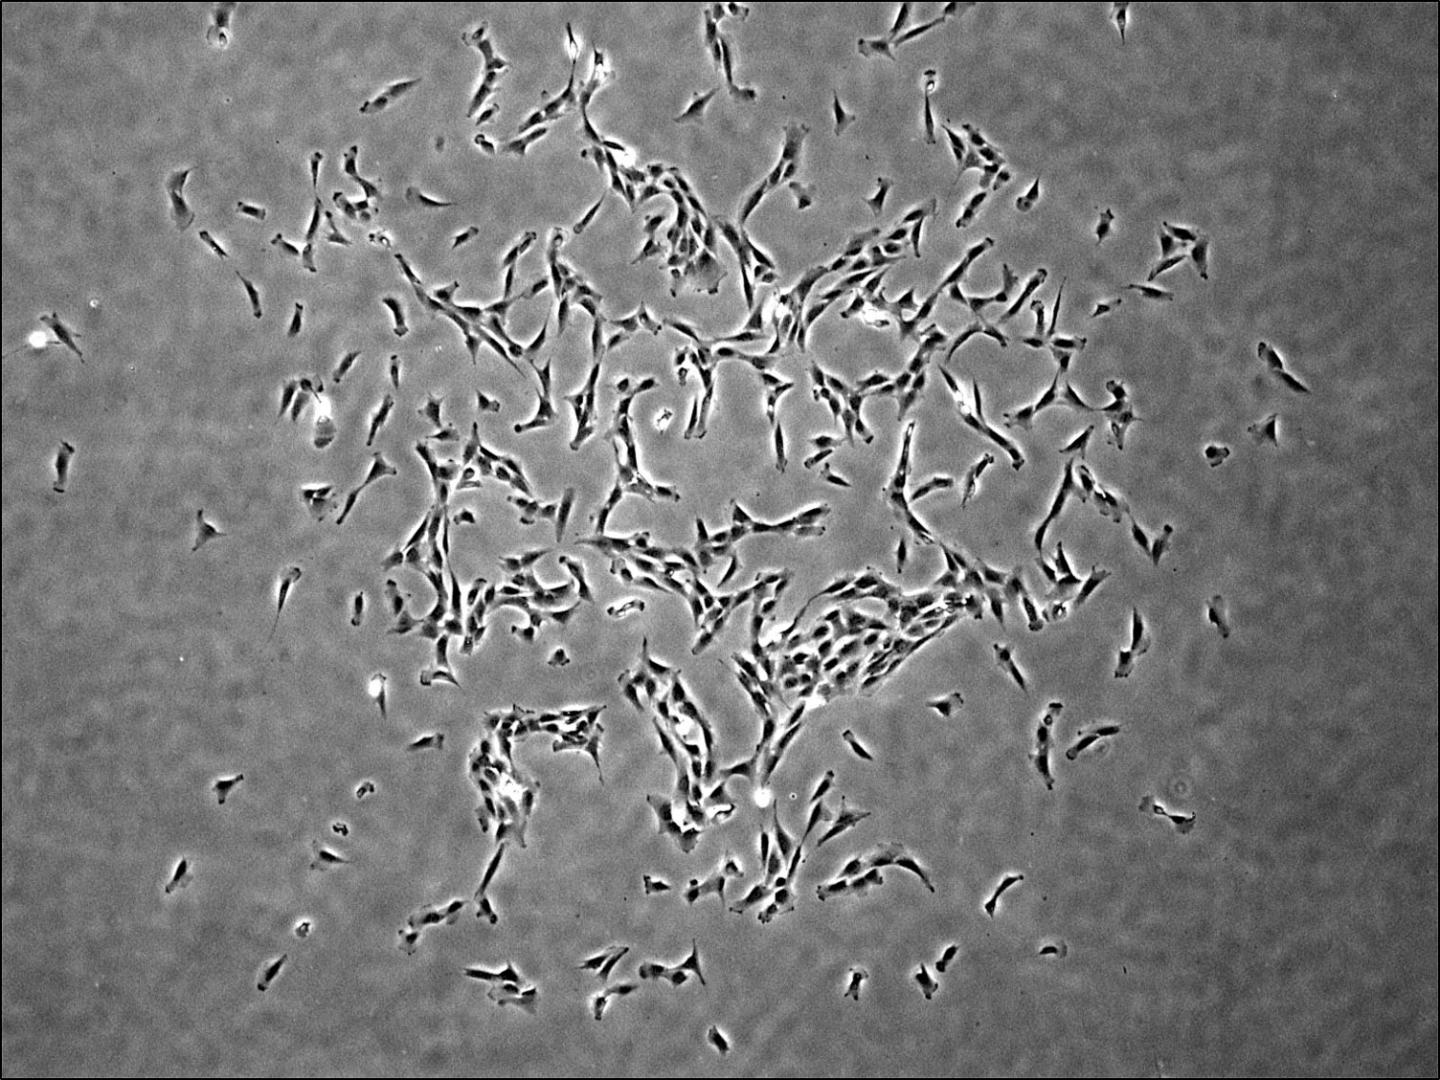 Colony Derived from a Single Human Skeletal Stem Cell